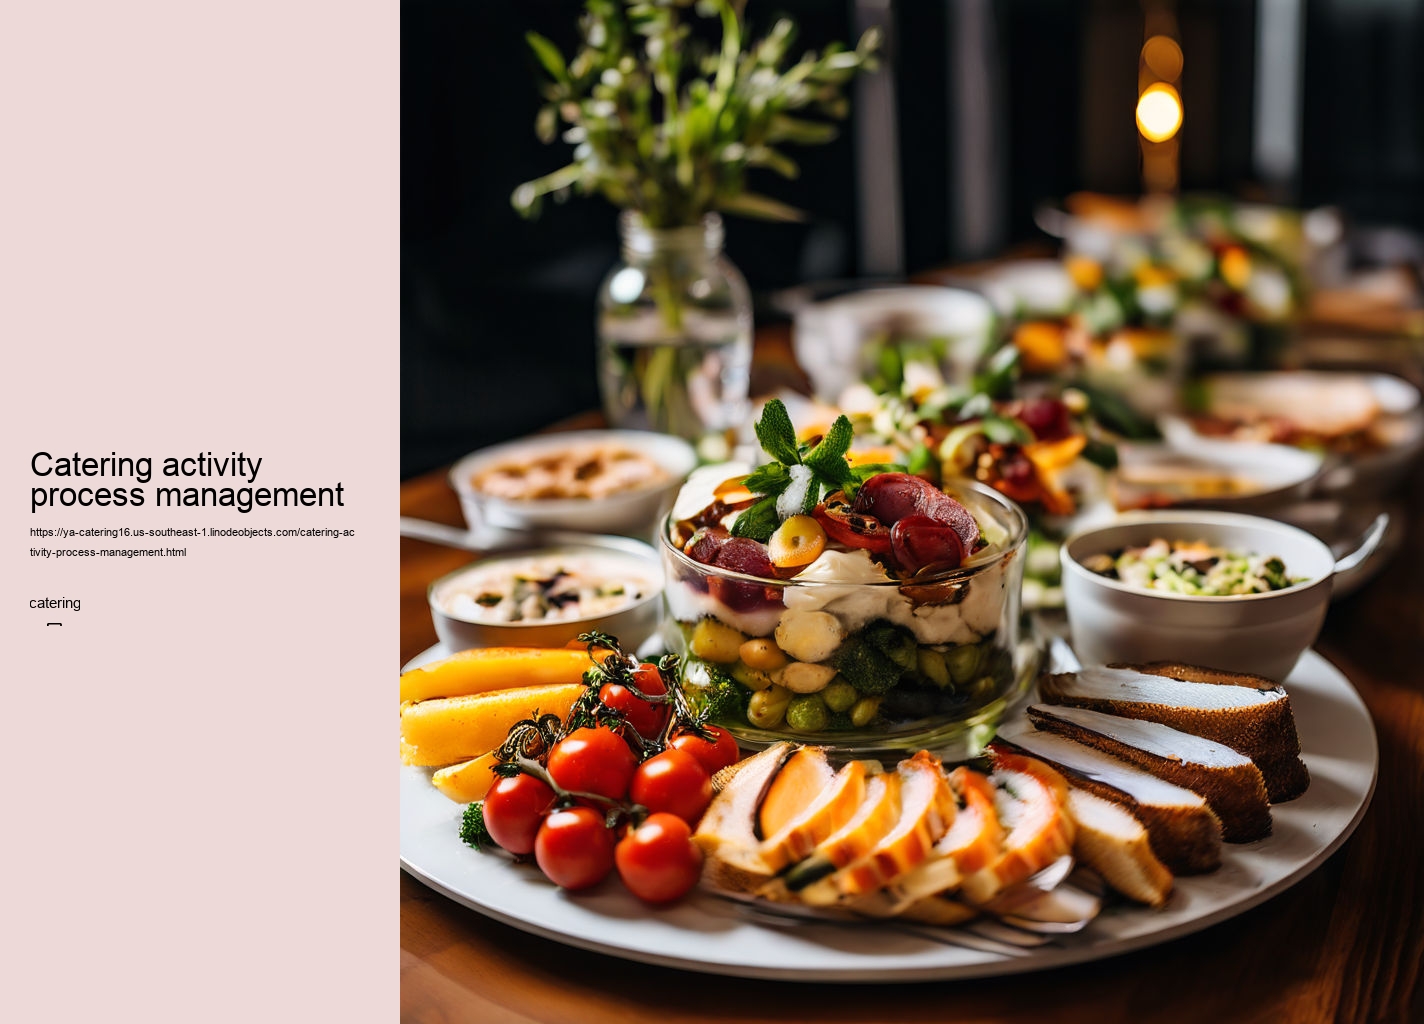 Catering activity process management